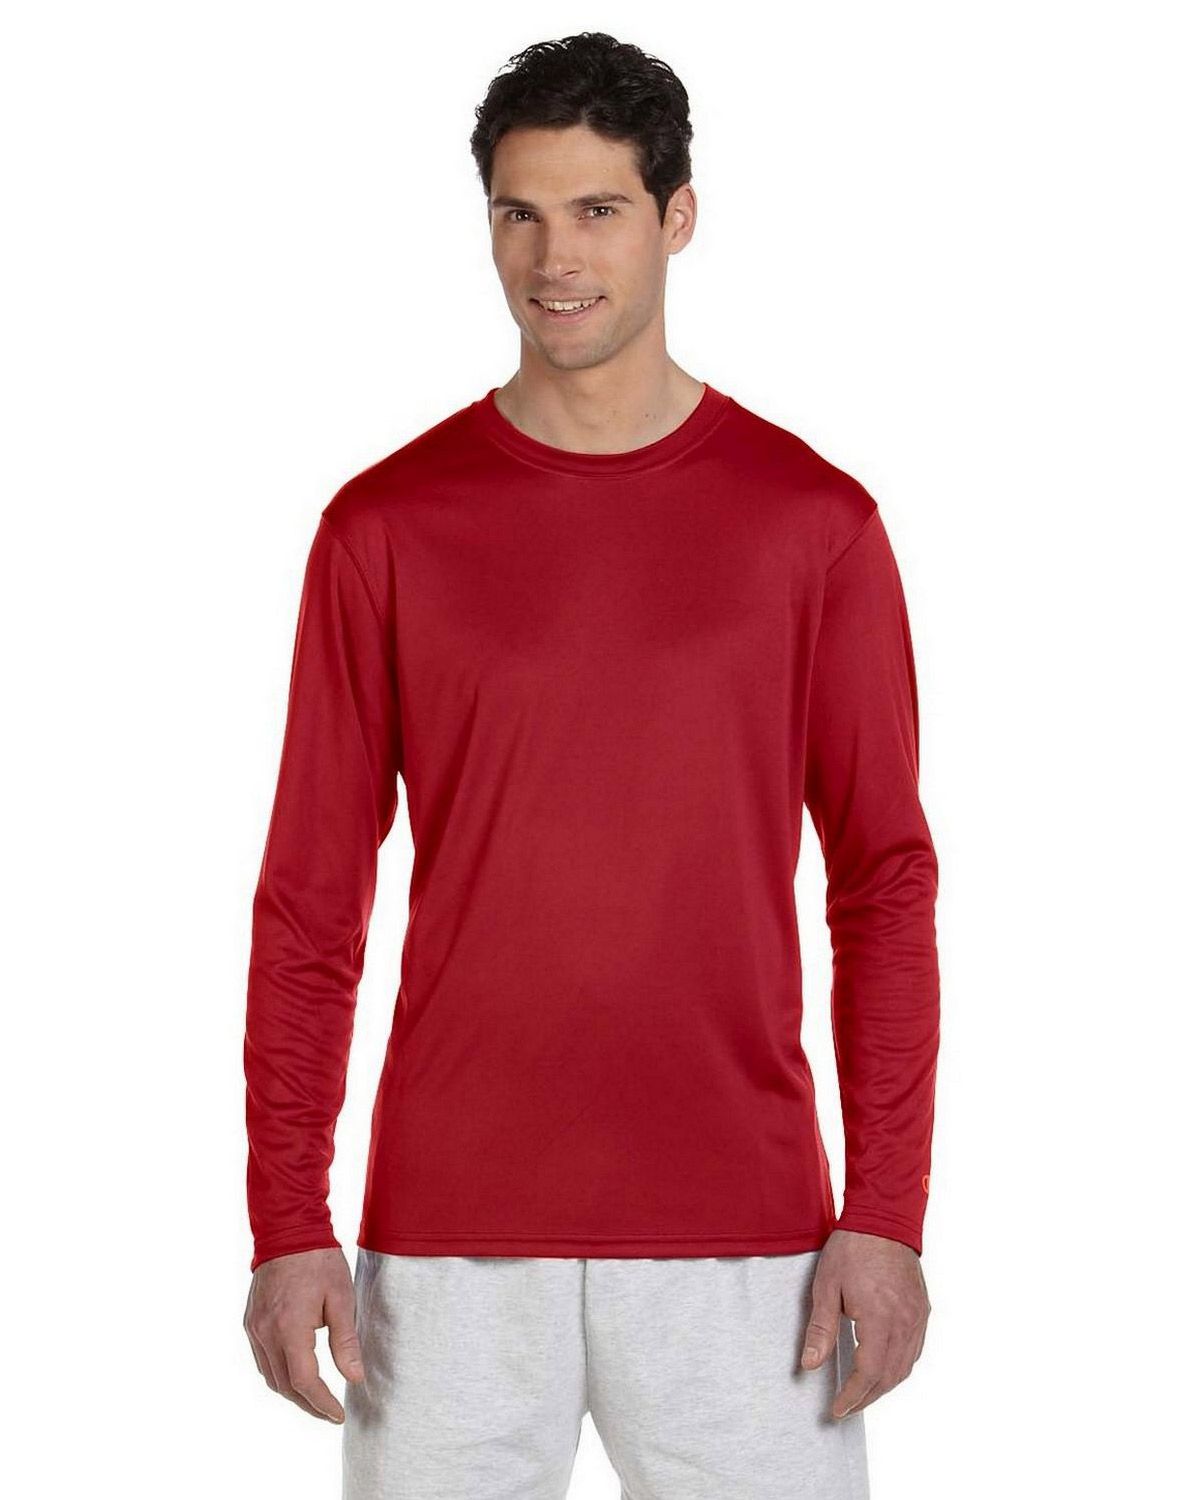 red long sleeve champion